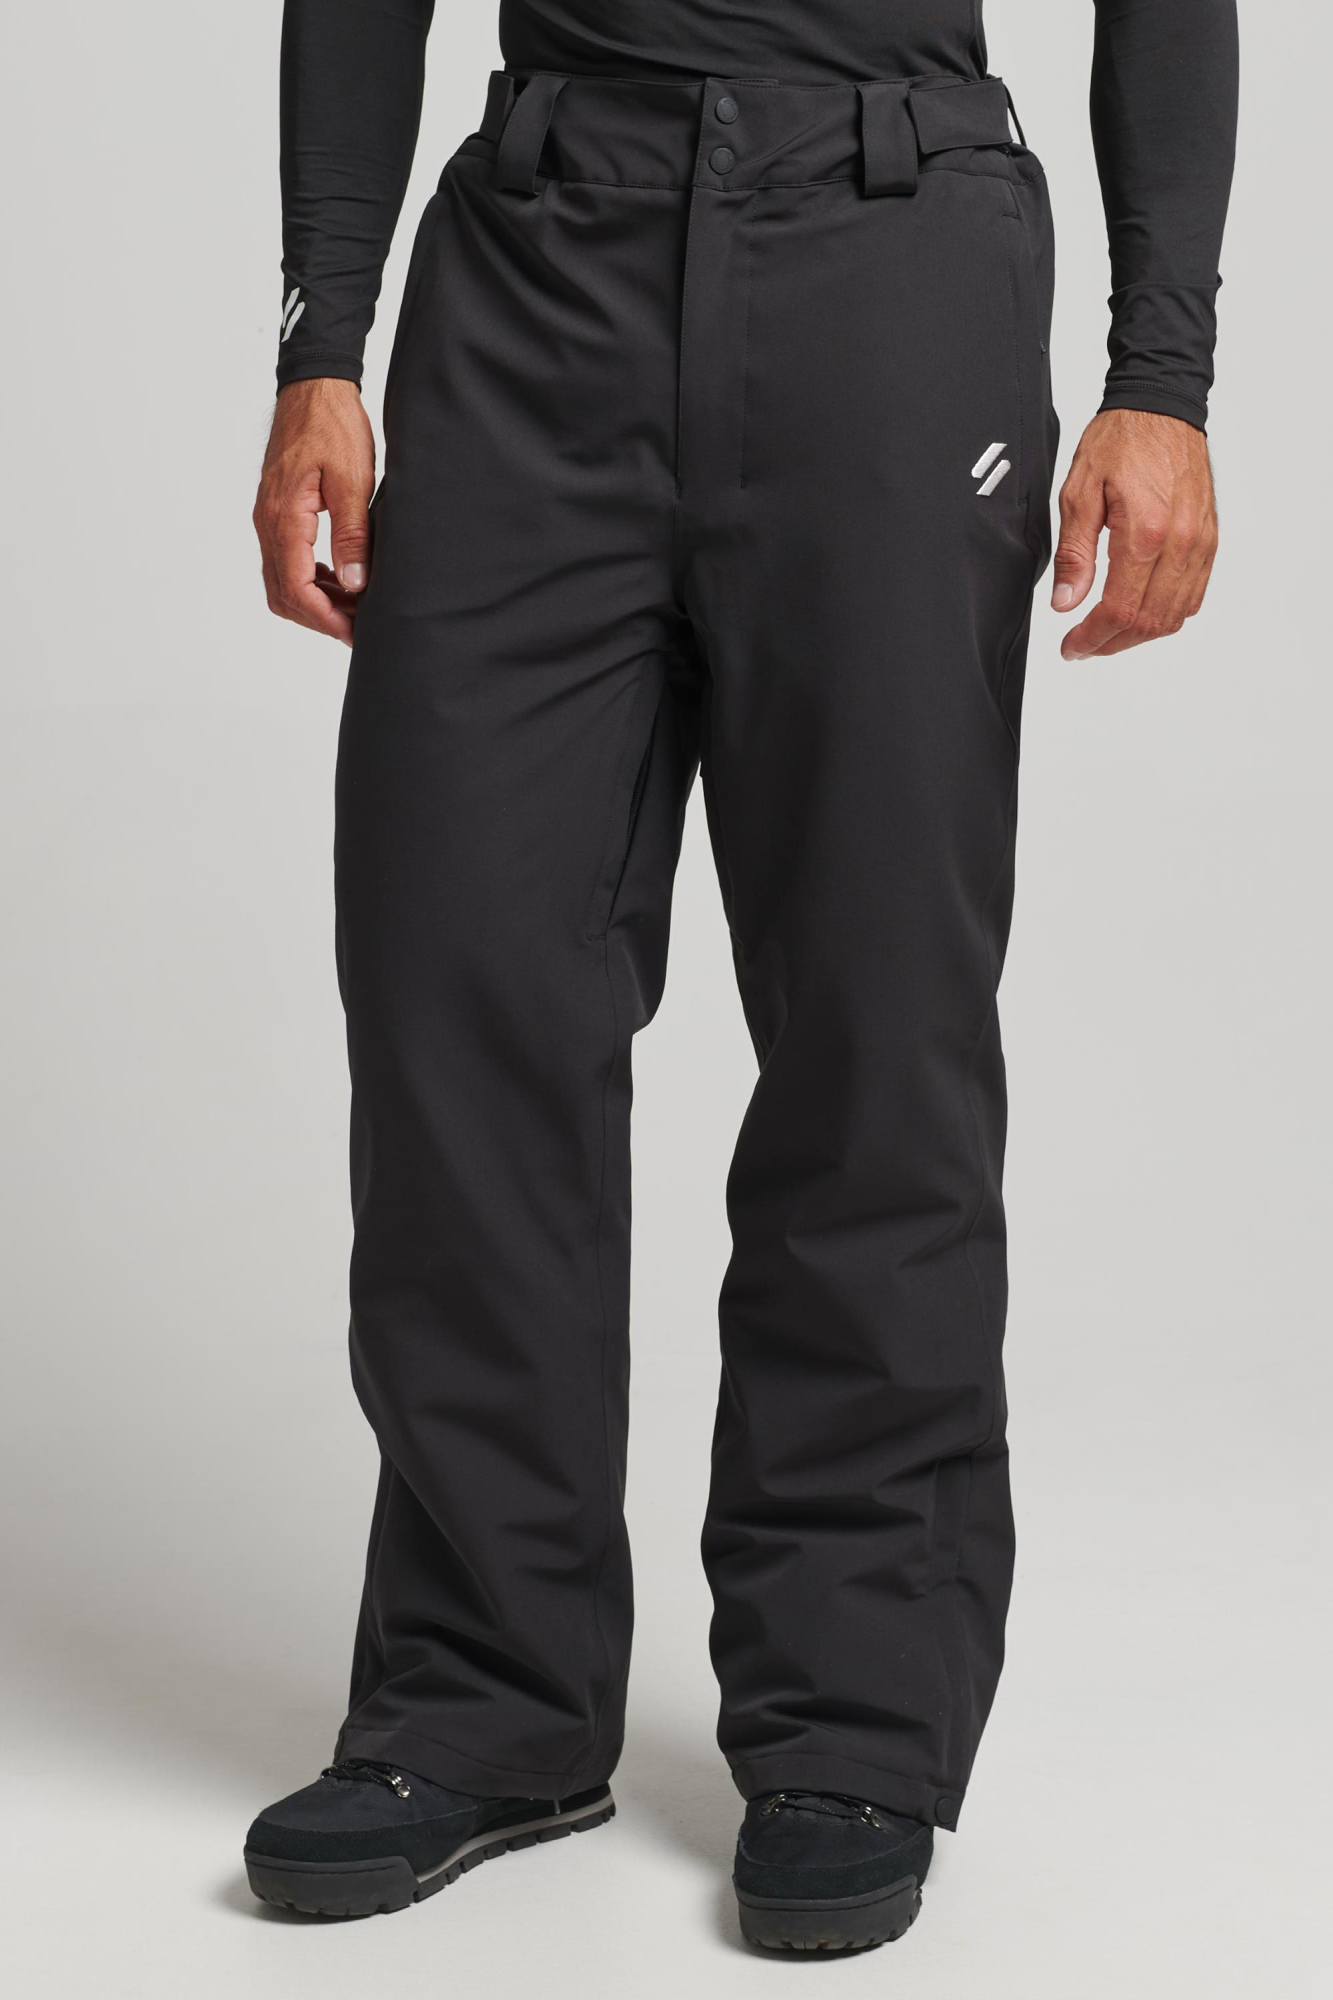 Superdry Mens Core Snow Pant Black - Size: Small